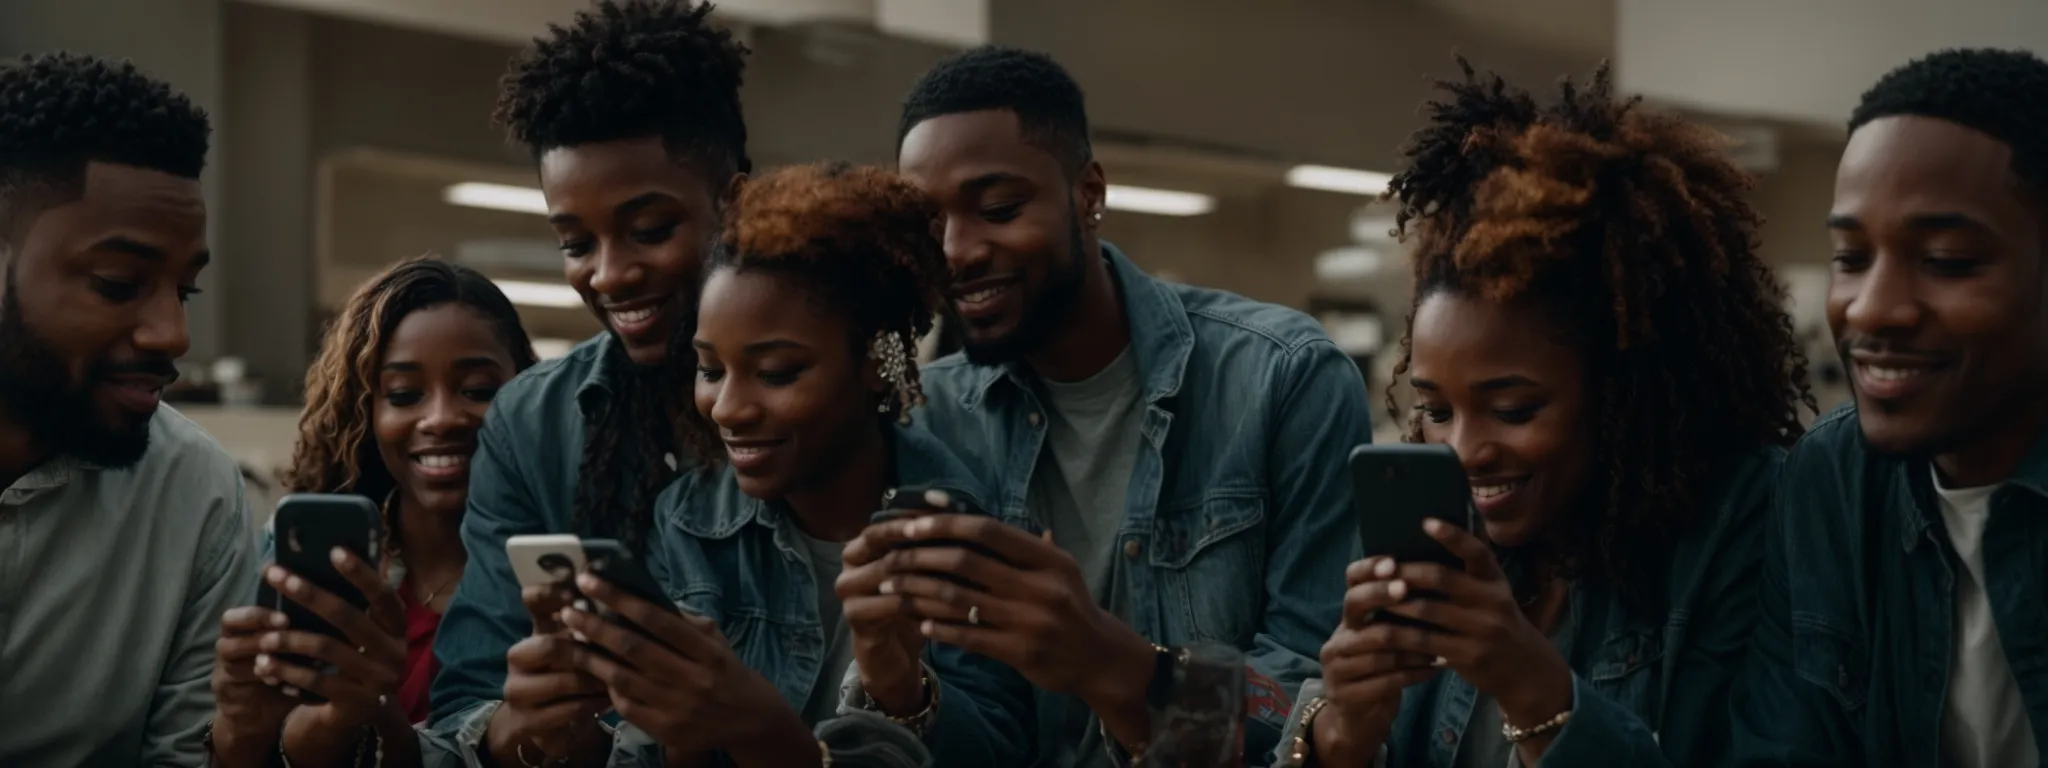 a group of diverse people excitedly looking at their smartphones, with notifications and likes floating around them.